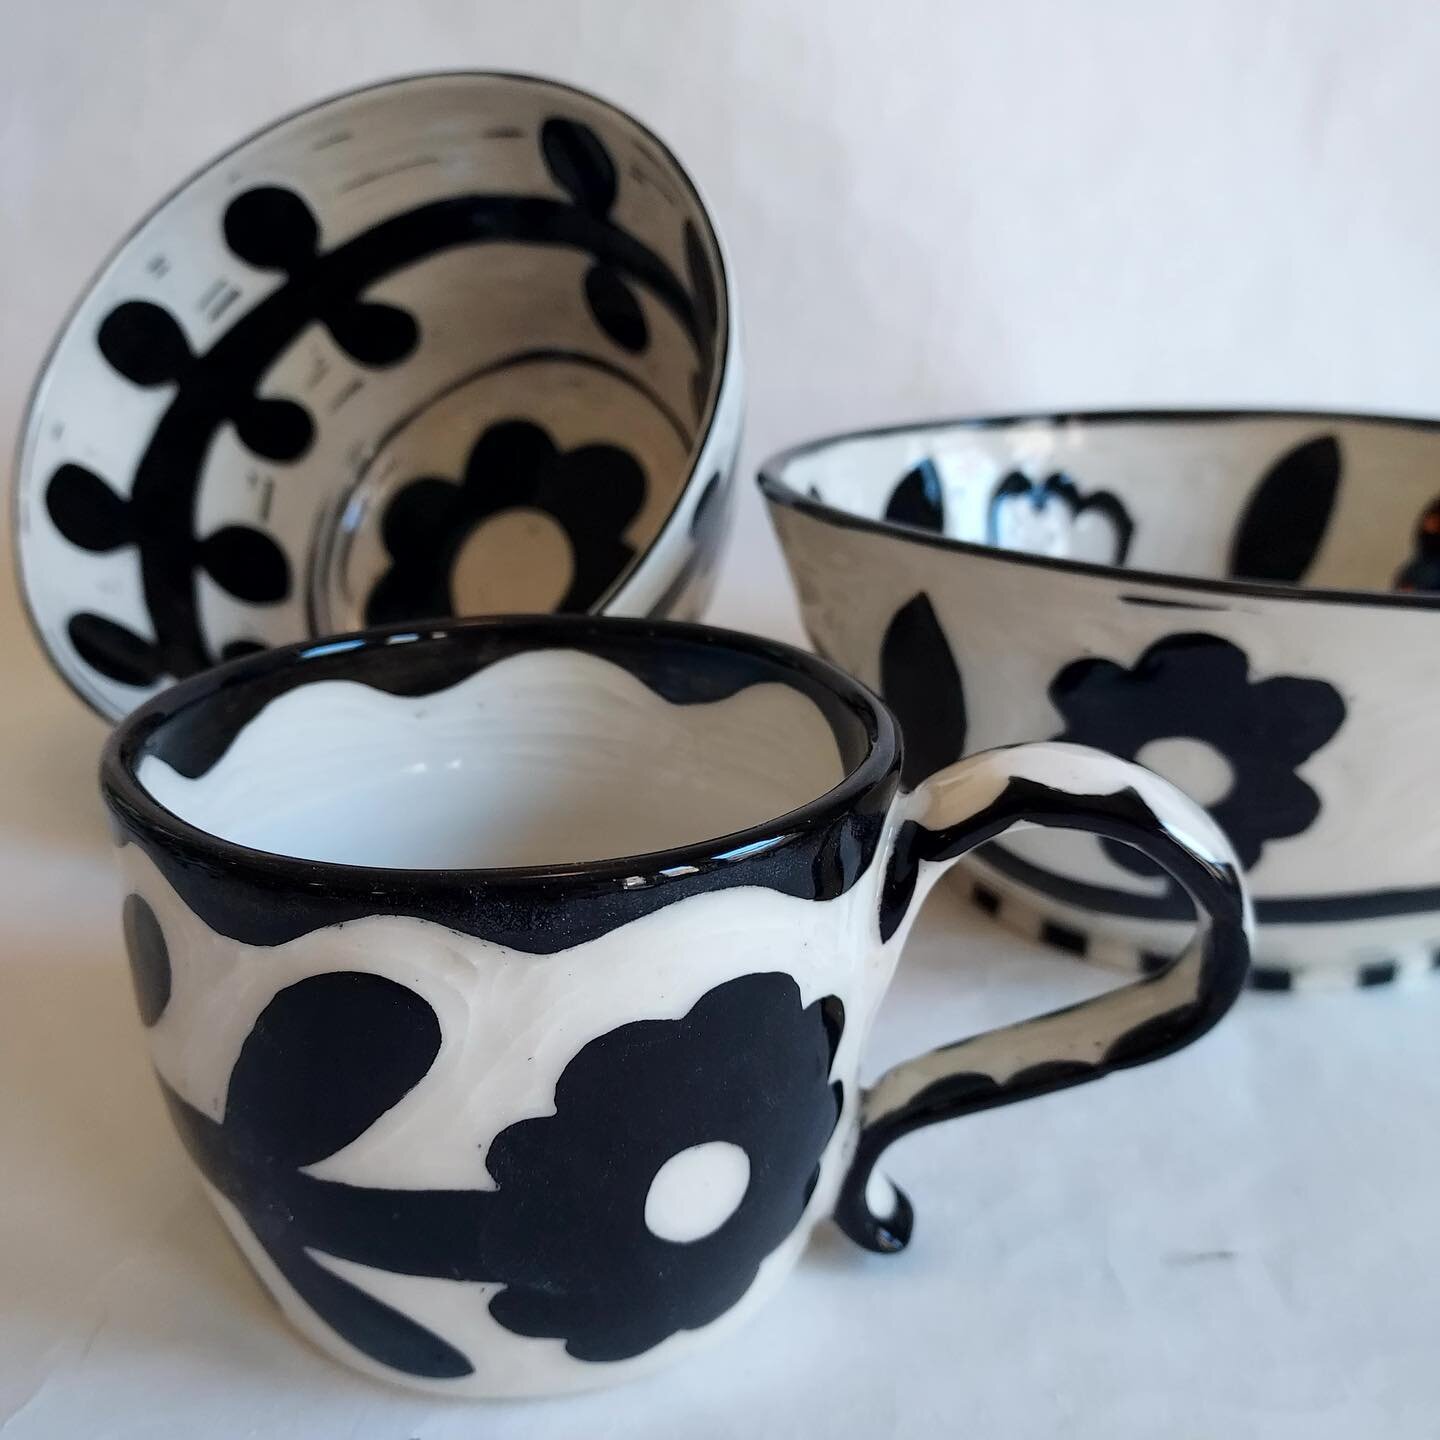 Sara Cox been creating work as @delilahpottery for over 30 years. This season she is focusing on making black and white pottery using the sgraffito technique. She applies black underglaze to leather hard wares, and carves images onto them, exposing t